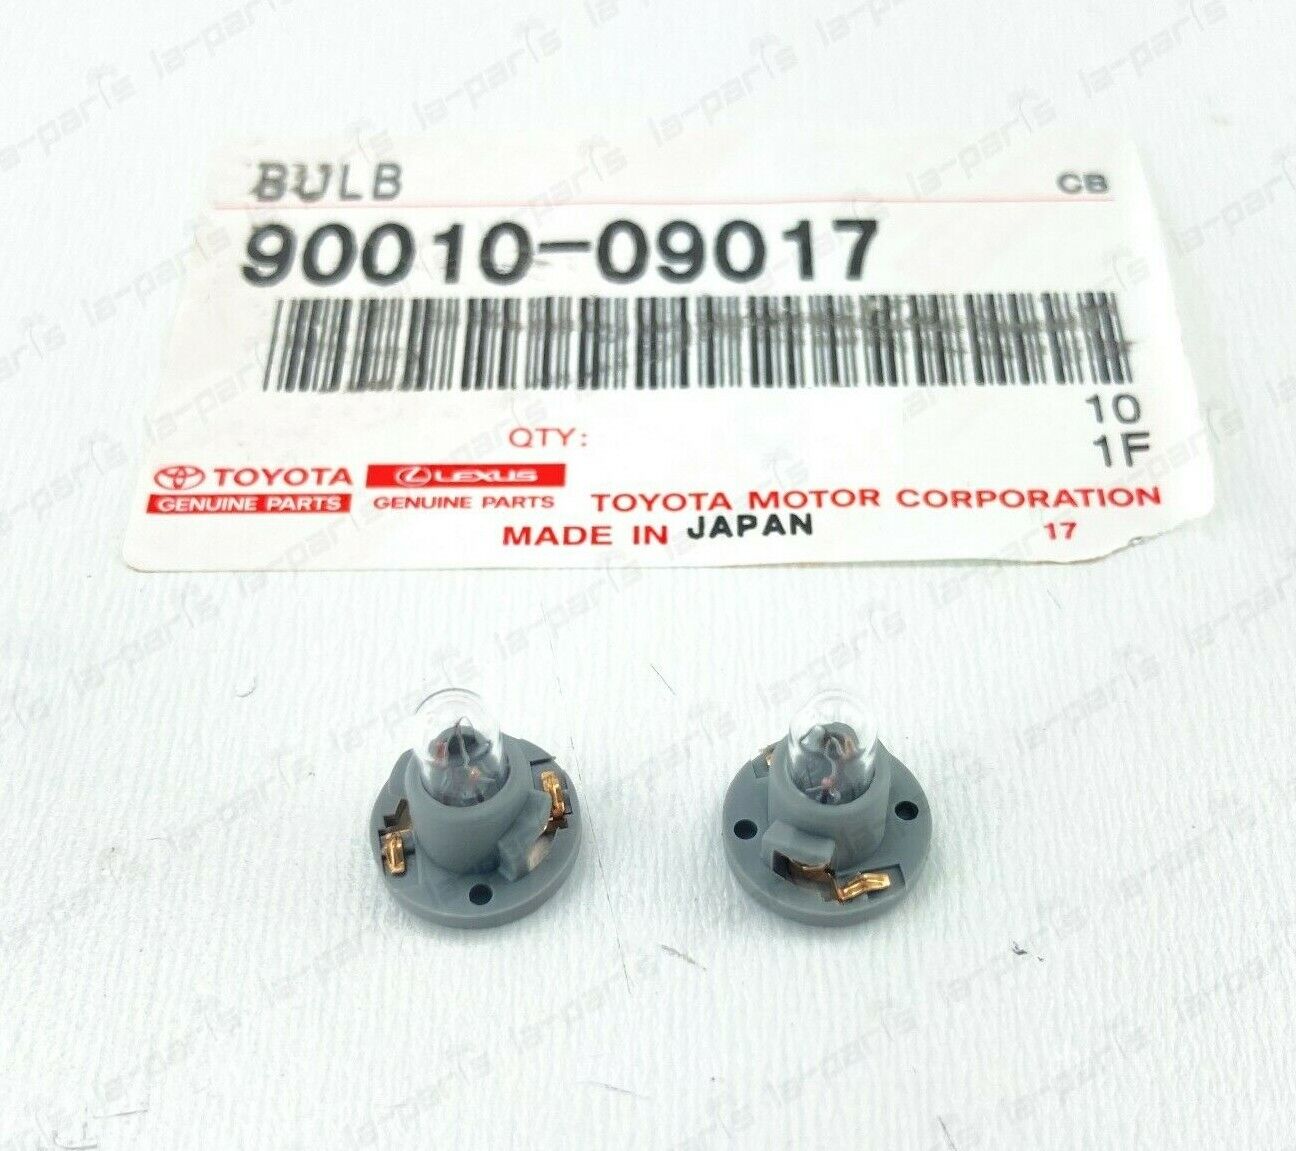 NEW GENUINE TOYOTA 90010-09017 COOLER CONTROL SWITCH BULB  SET OF 2